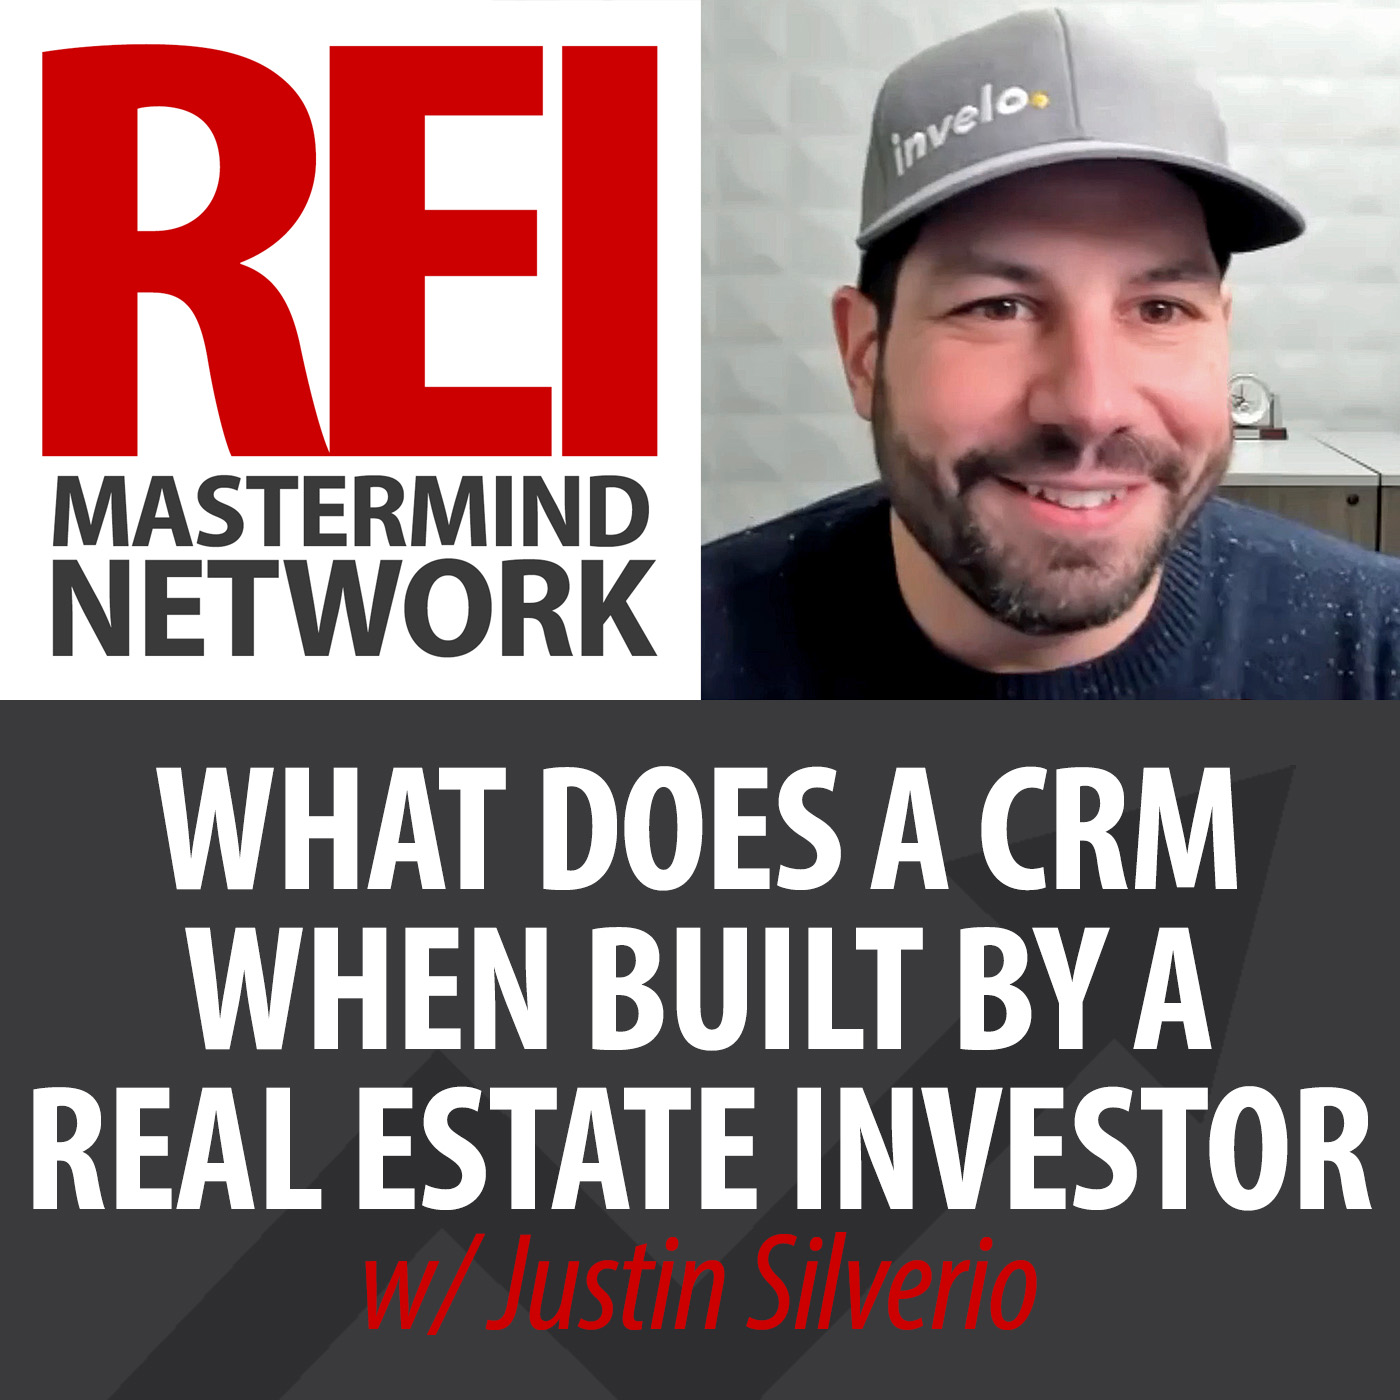 What Does a CRM Look Like When Built by a Real Estate Investor with Justin Silverio Image